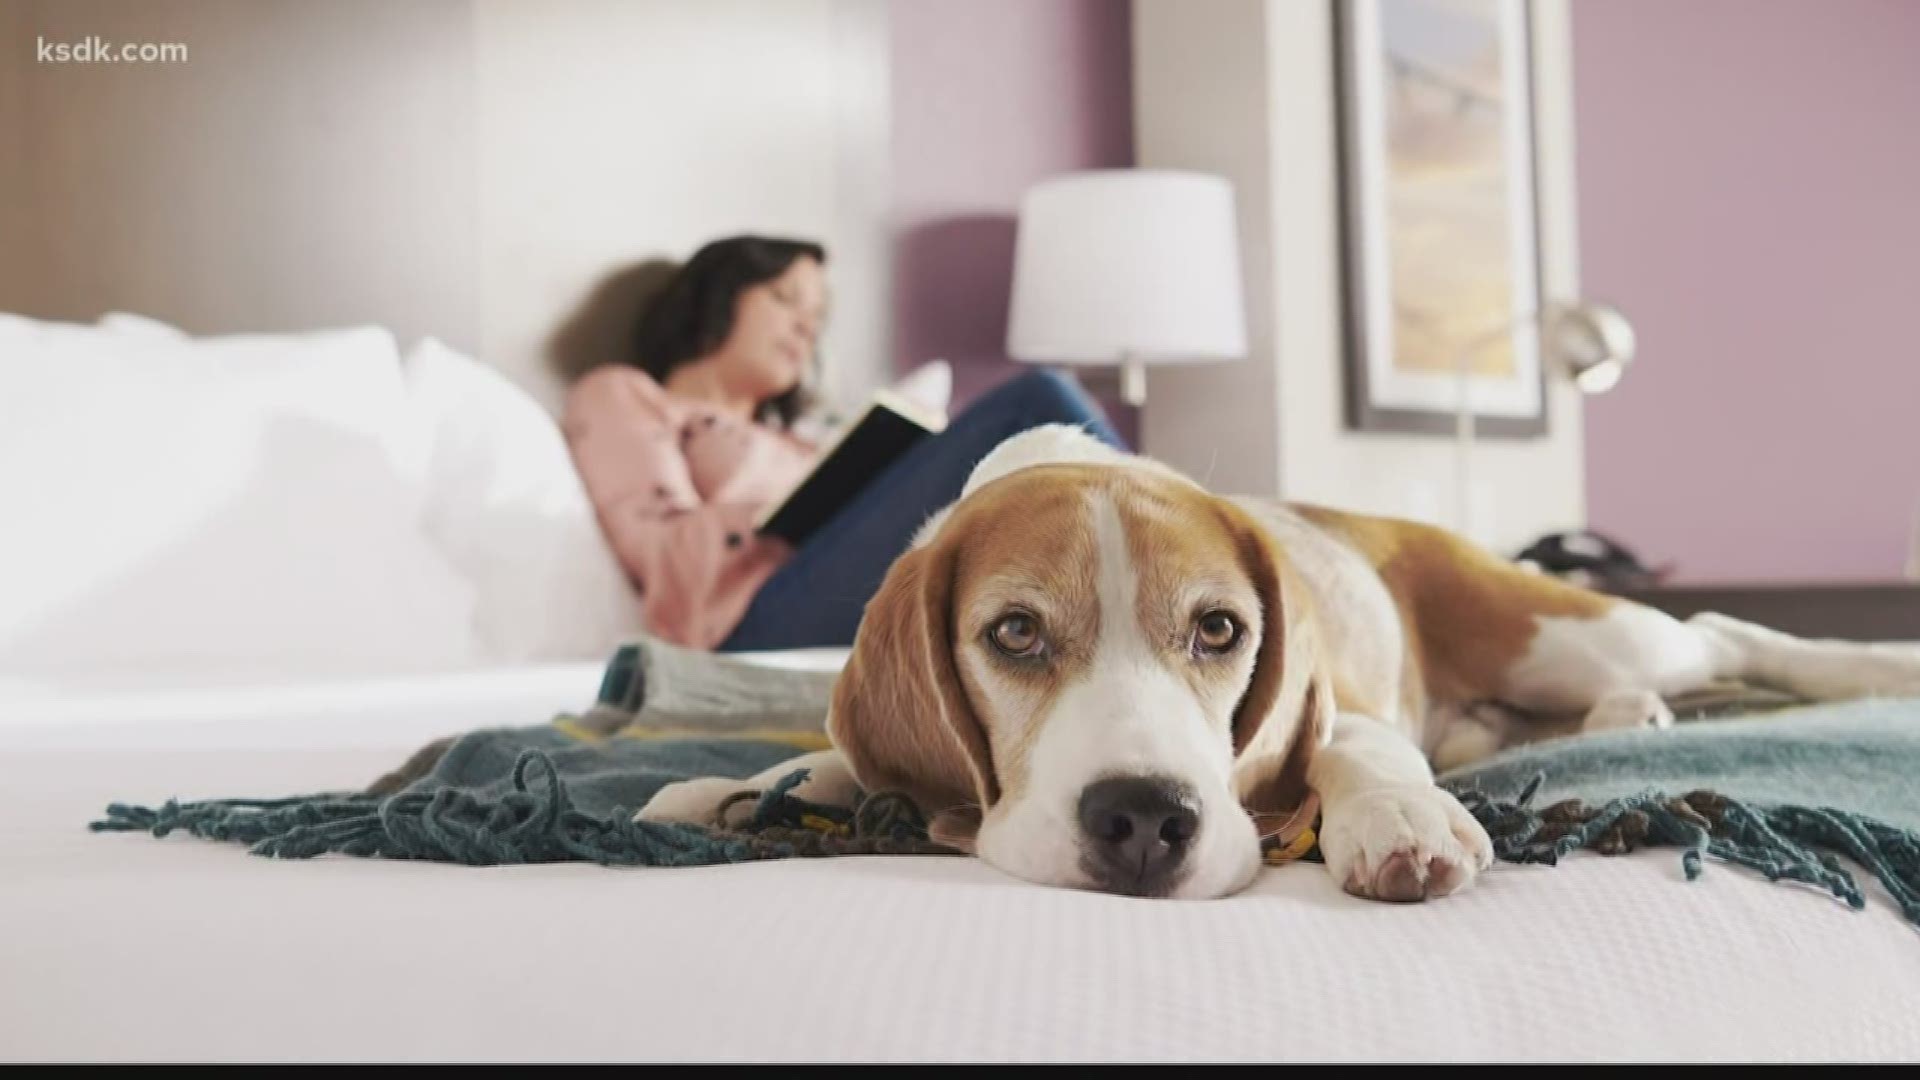 See how La Quinta is using pet therapy dogs, among other things, to help reduce business travel stress.